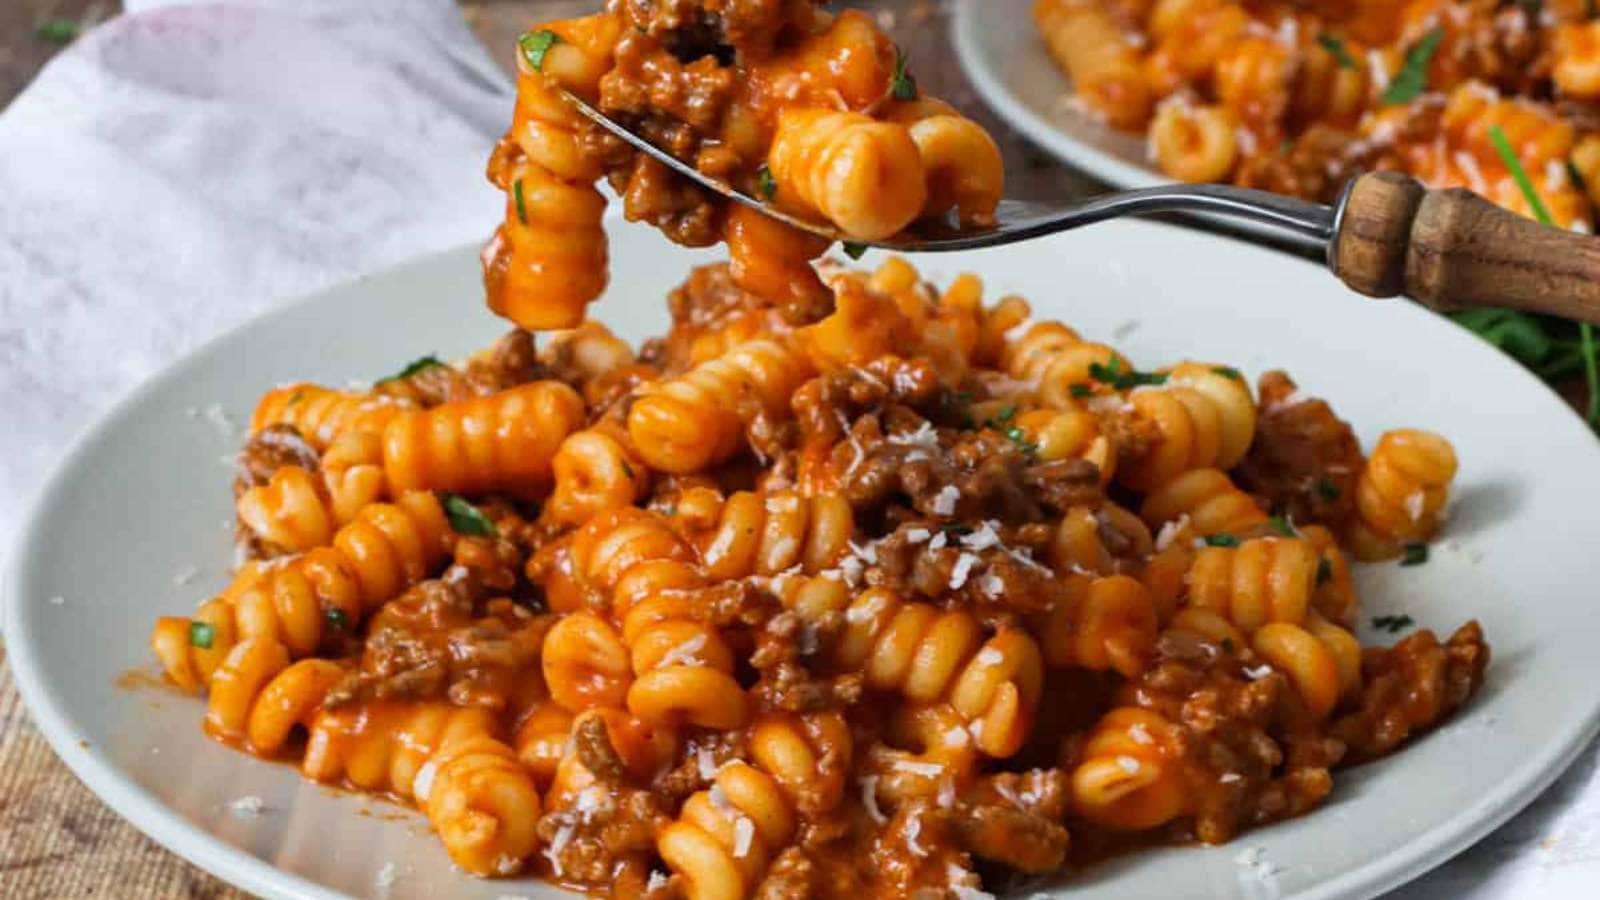 Homemade Beefaroni Recipe With 3 Ingredients recipe by Platter Talk.